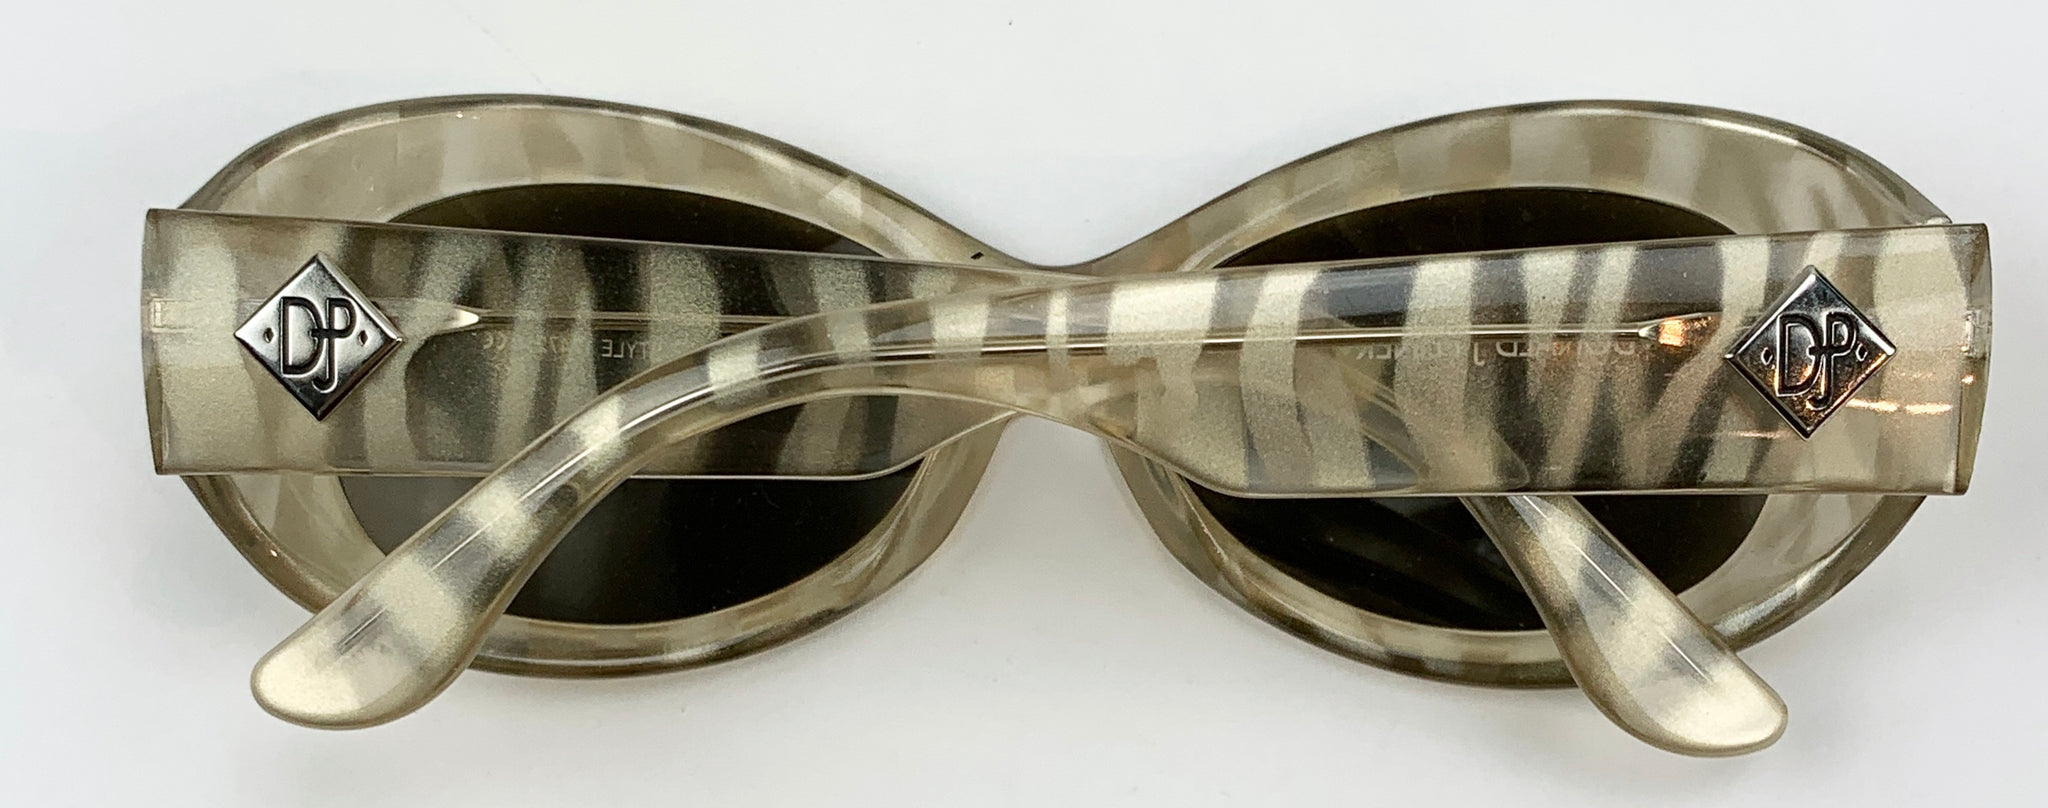 [The Golden Girls] McClanahan, Rue. (1934–2010) Perfume Bottle and Donald J. Pliner Sunglasses from McClanahan Collection